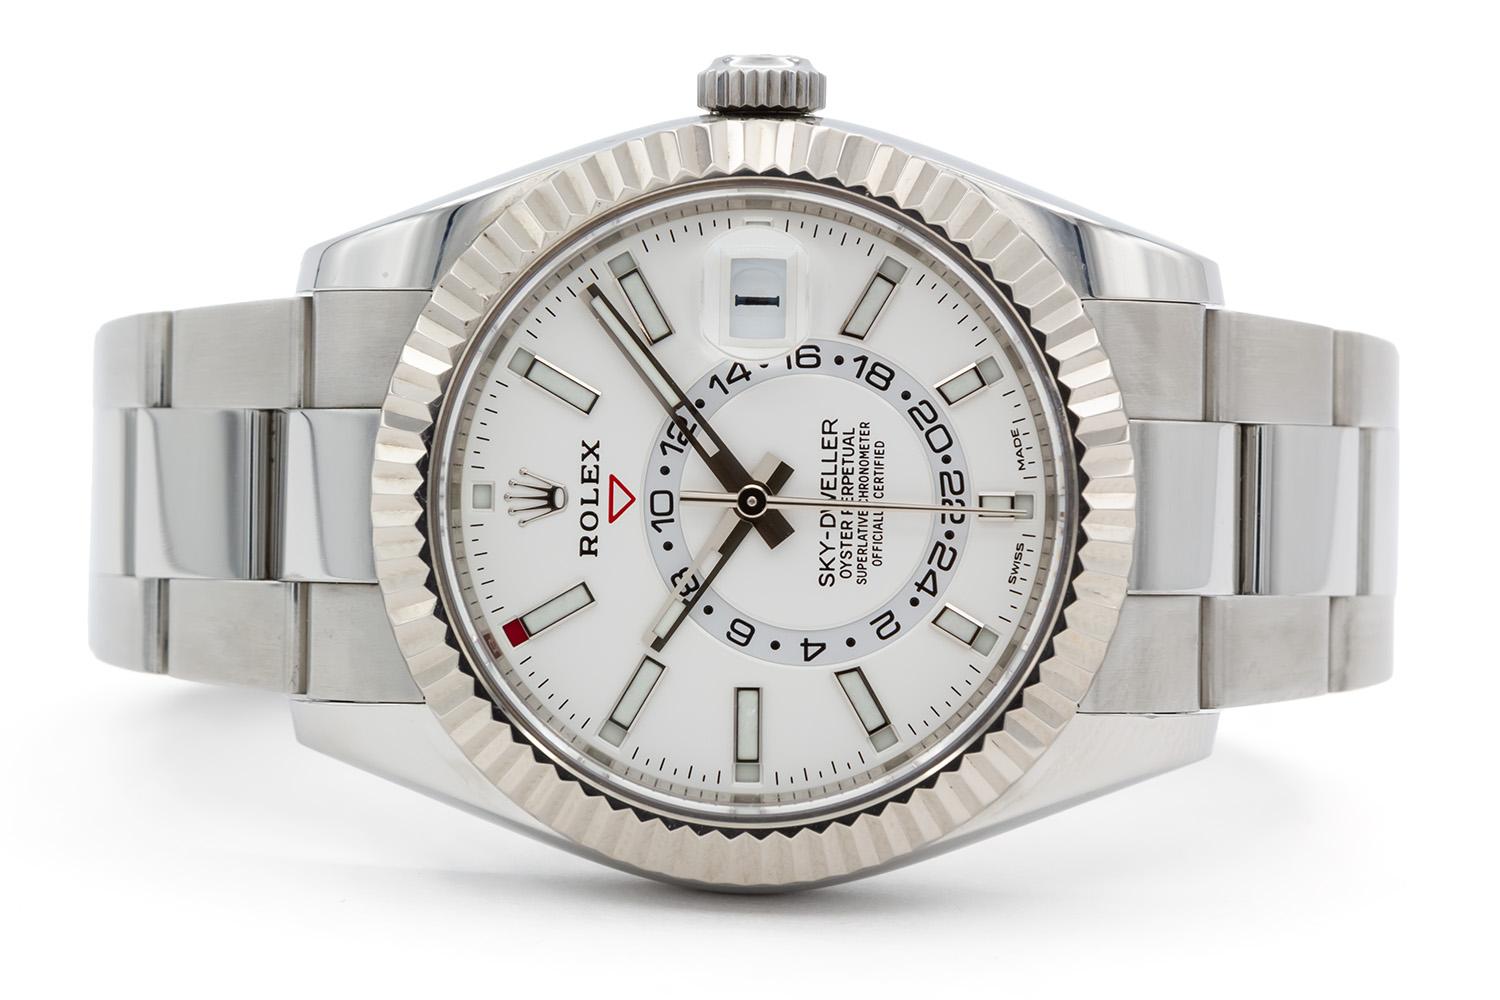 We are pleased to offer this 2020 Rolex Sky-Dweller 326934 With Box & Papers. As we're sure you know stainless steel Rolex models are quite hard to find these days. This collectible mens watch features a stunning white dial, stainless steel 42mm